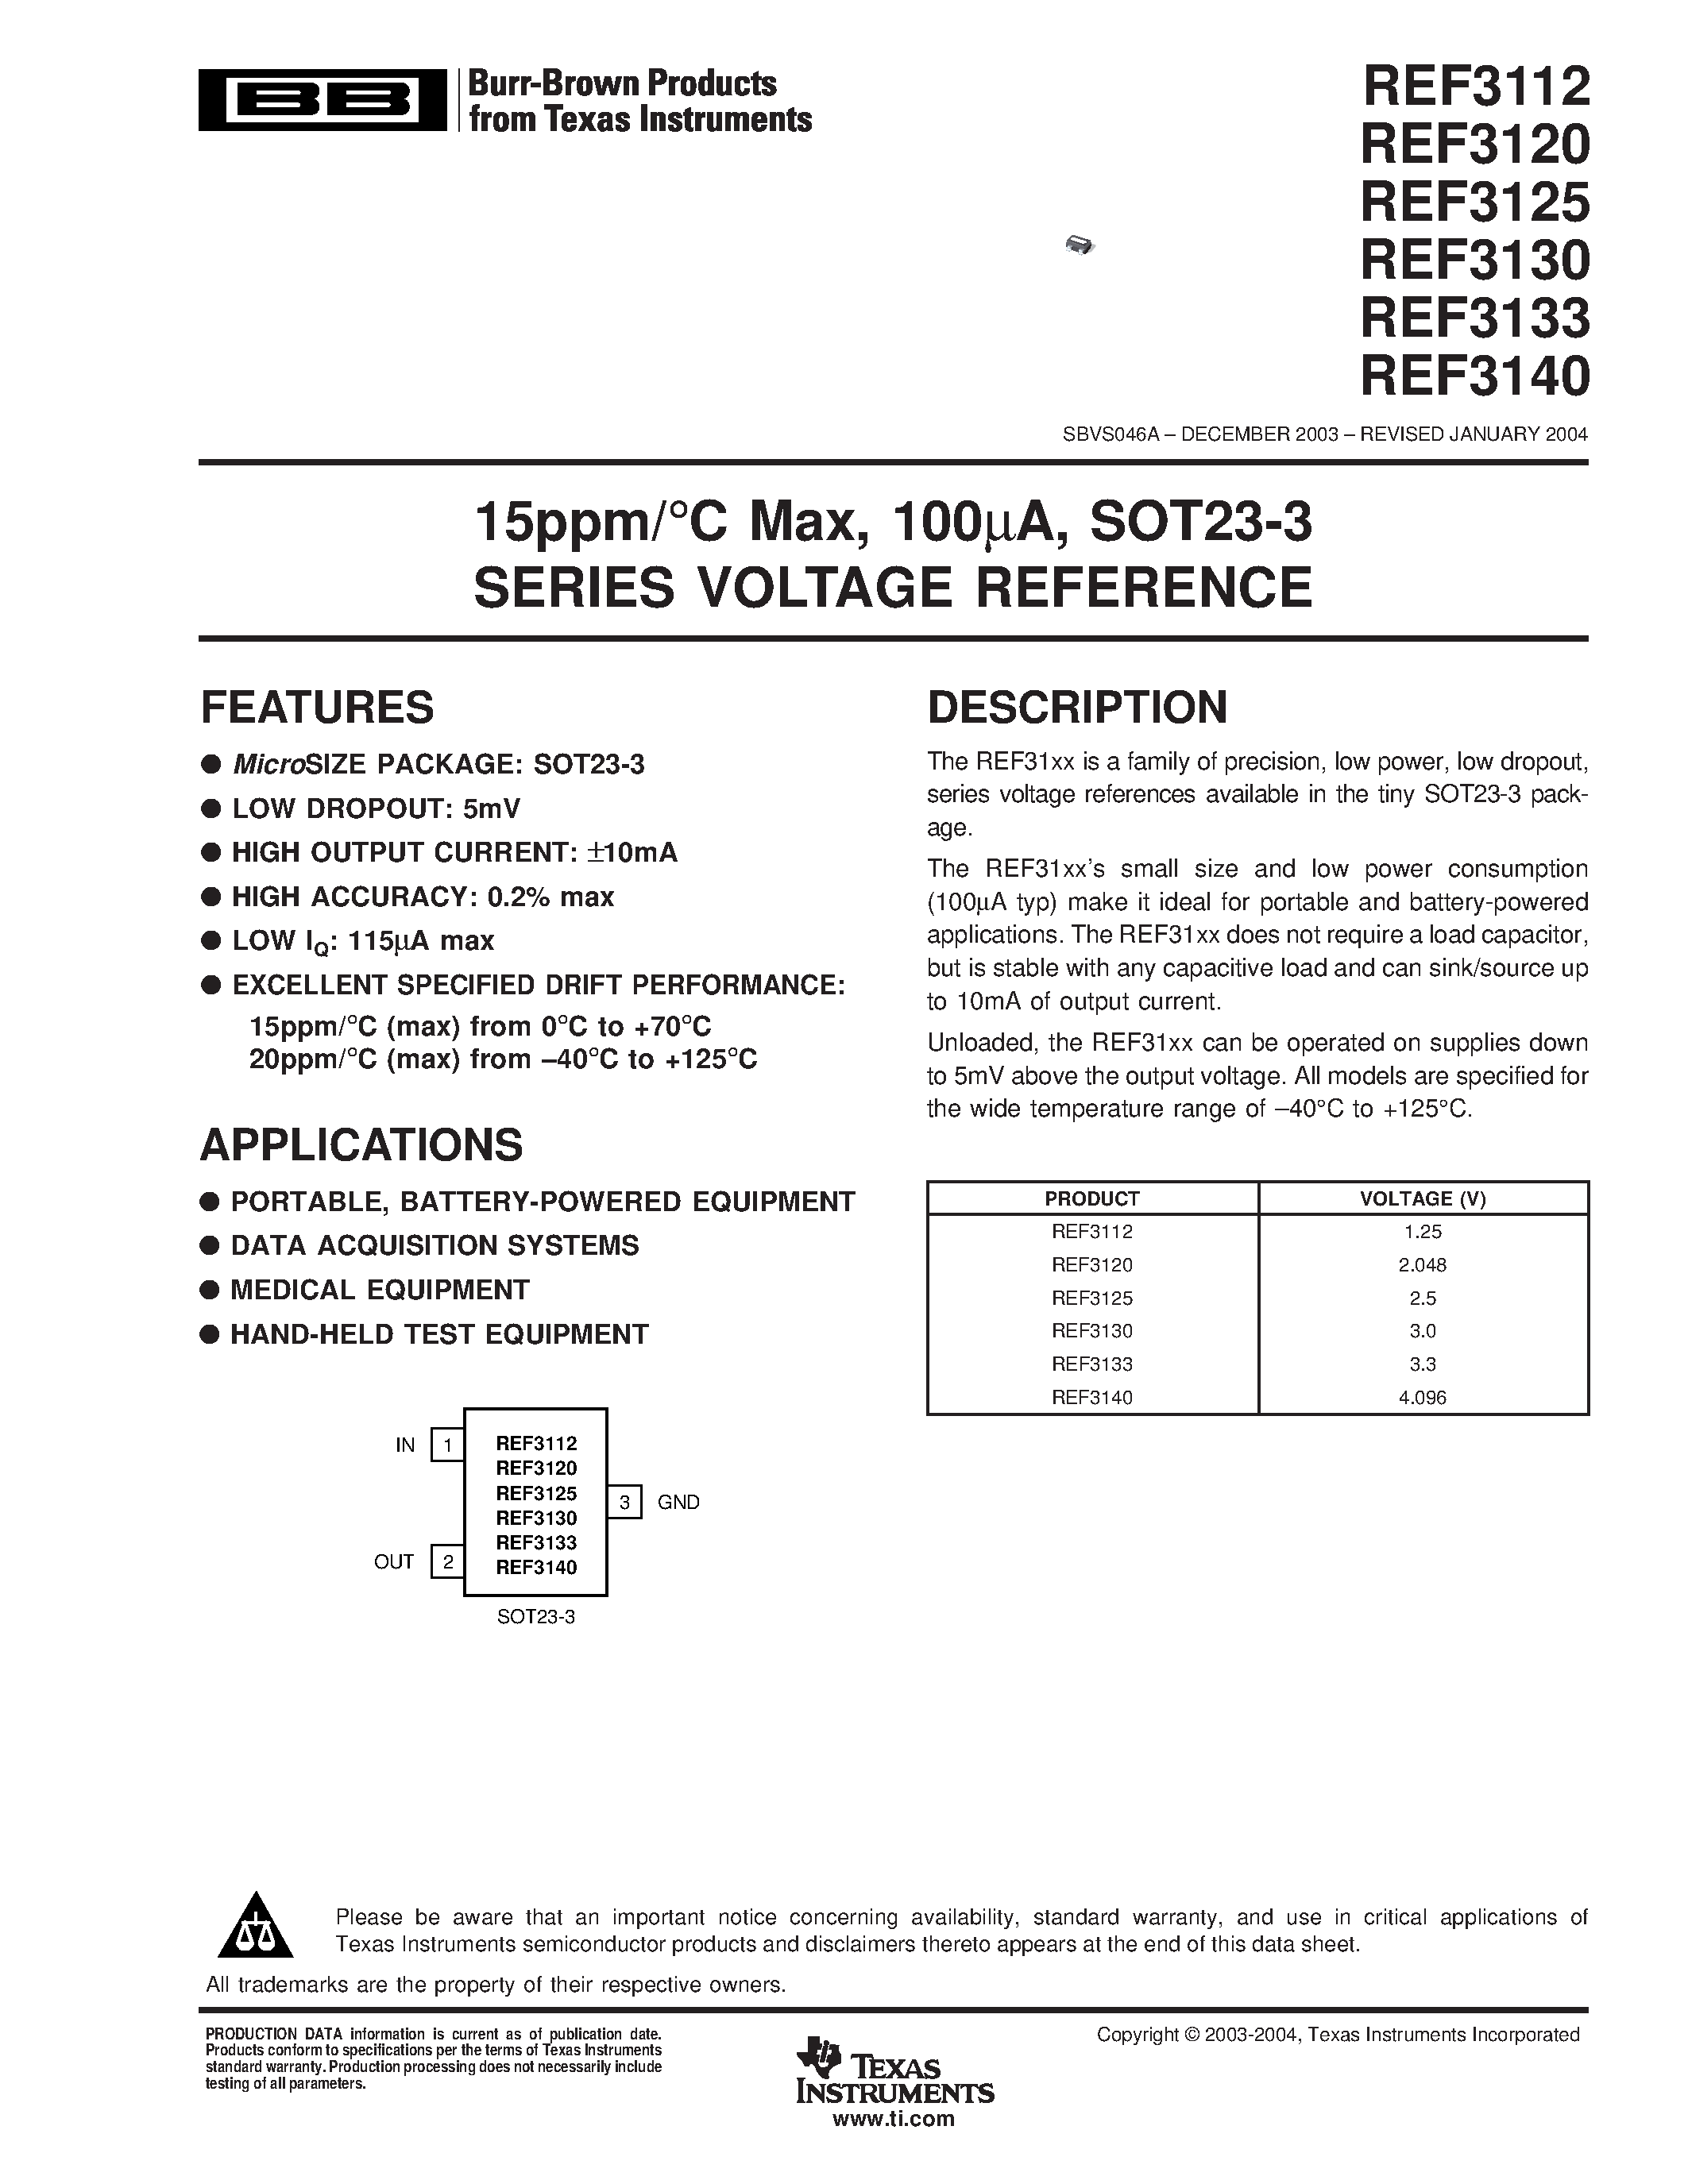 Даташит REF3120 - 15ppm/C Max/ 100UA/ SOT23-3 SERIES VOLTAGE REFERENCE страница 1